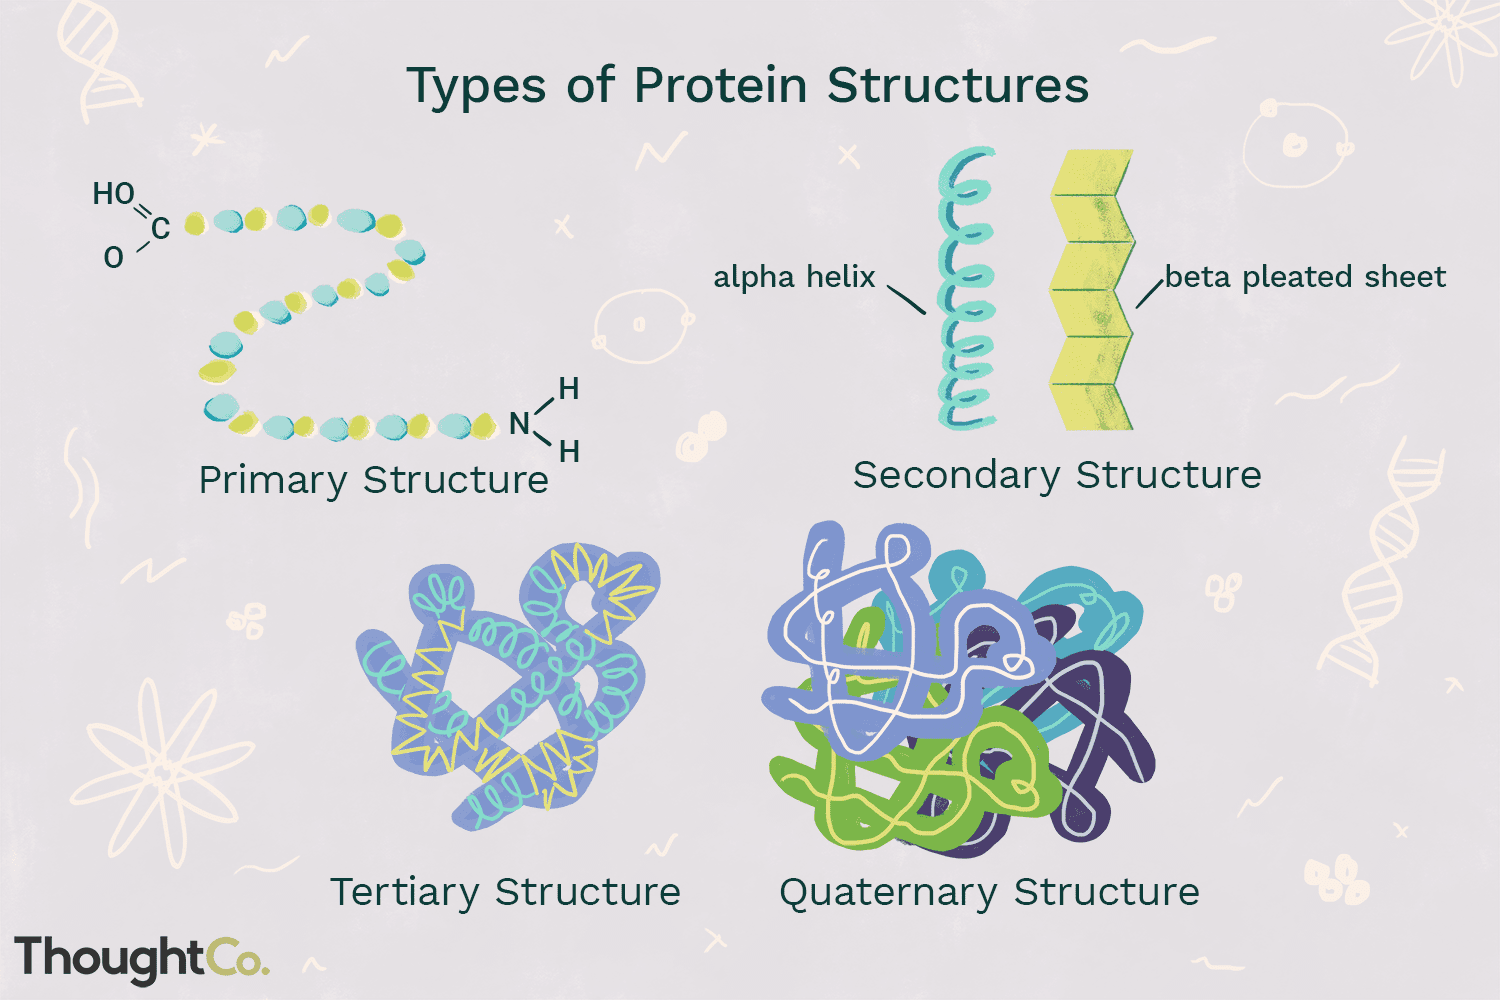 <p>-2 or more individual polypeptide subunits -not present in all proteins</p>